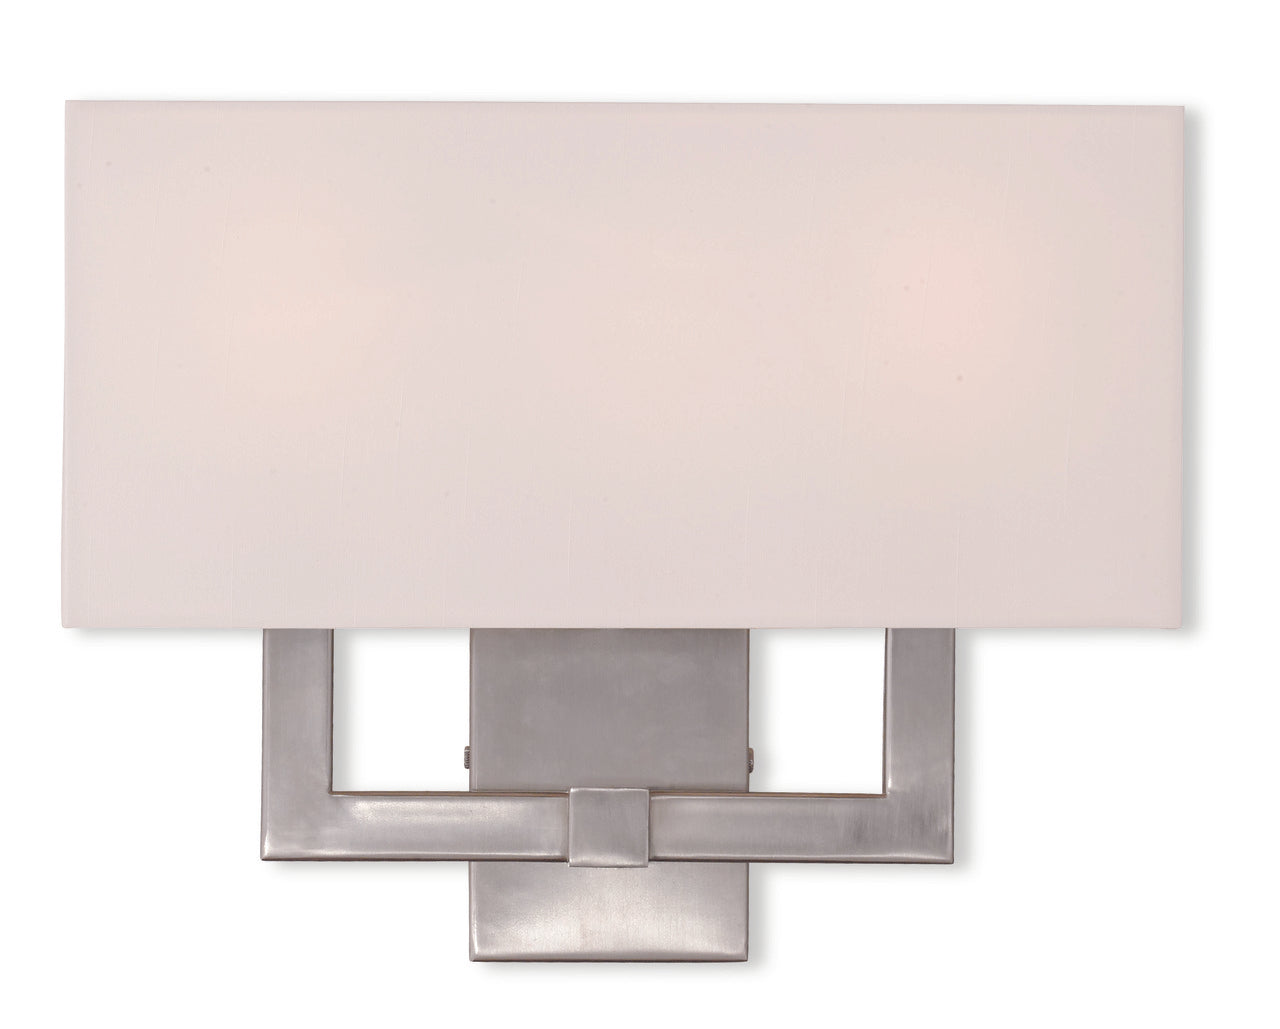 LIVEX Lighting 51104-91 Hollborn Contemporary Wall Sconce in Brushed Nickel (3 Light)